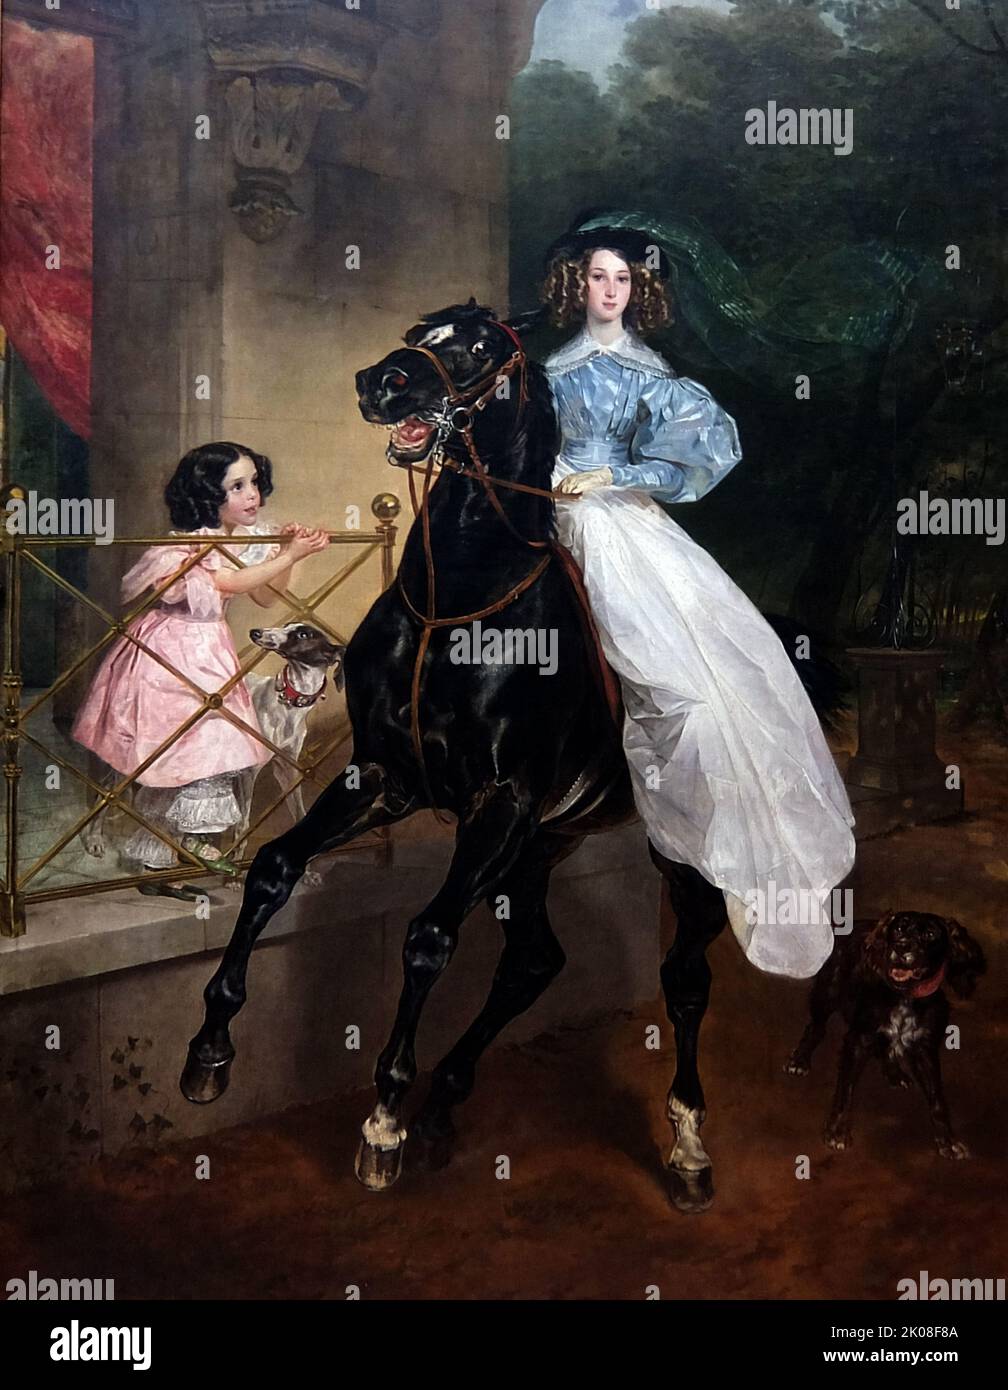 Horsewoman, 1832 by K. P. Briullov. Karl Pavlovich Bryullov (12 December 1799 - 11 June 1852), original name Charles Bruleau, also transliterated Briullov and Briuloff, and referred to by his friends as Karl the Great, was a Russian painter Stock Photo